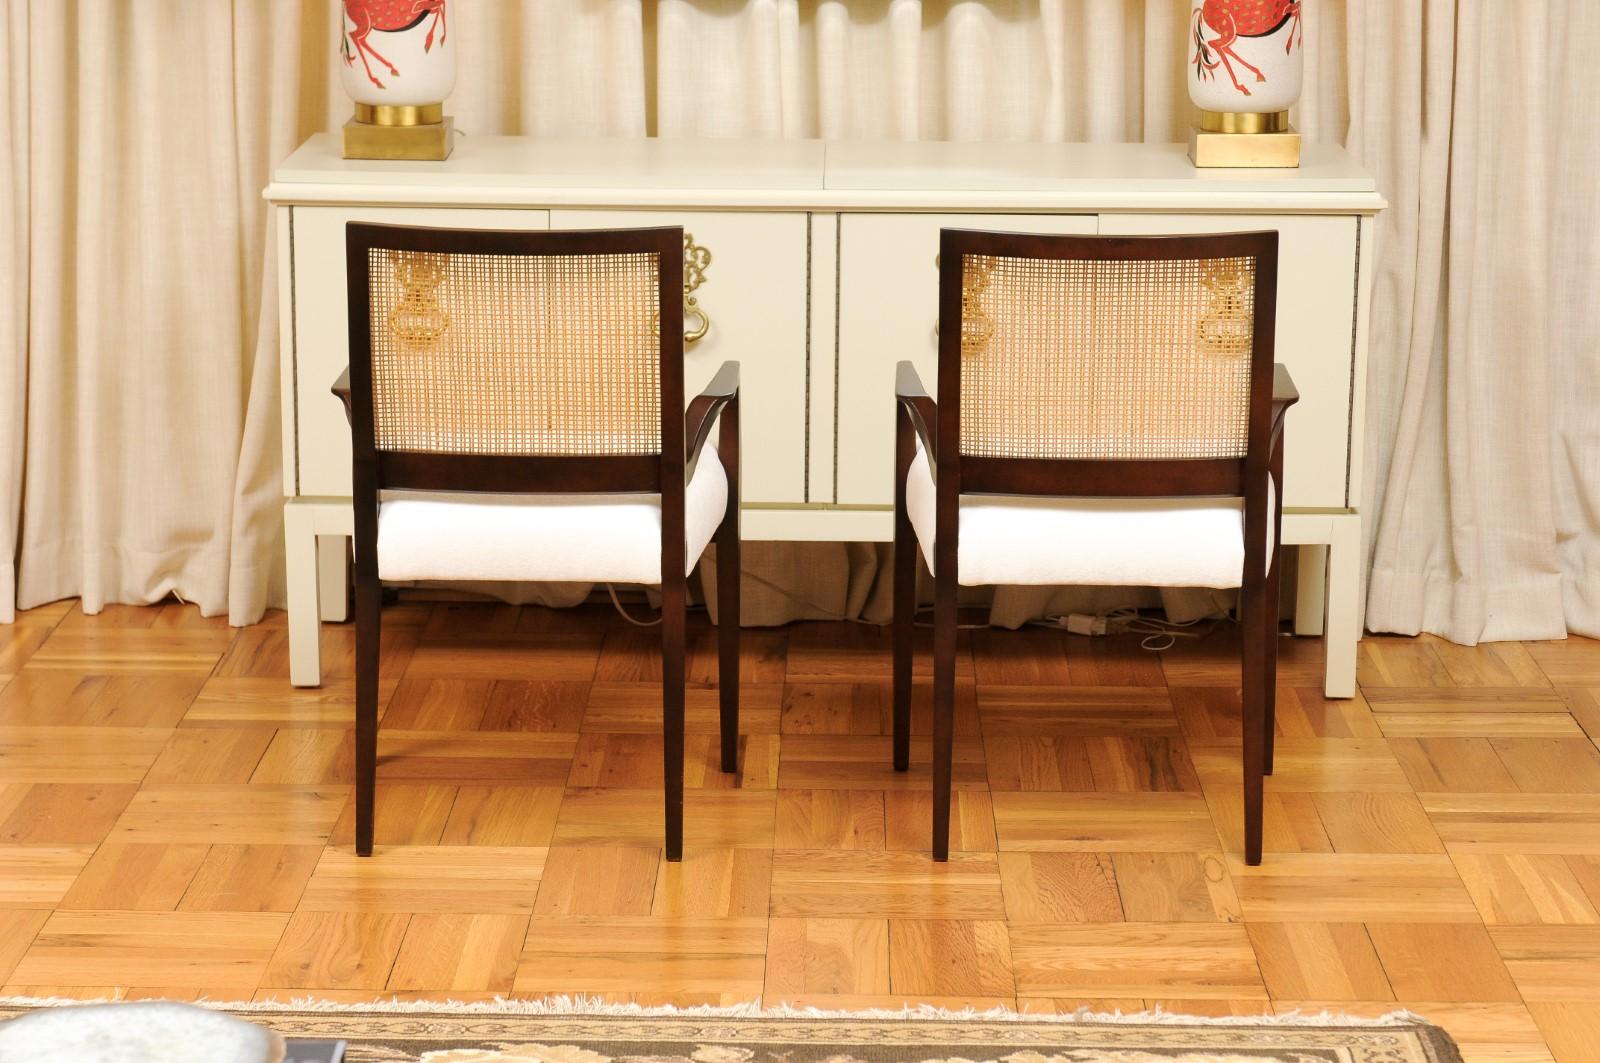 All Arms, Unrivaled Set of 12 Cane Dining Chairs by Michael Taylor, circa 1960 For Sale 2